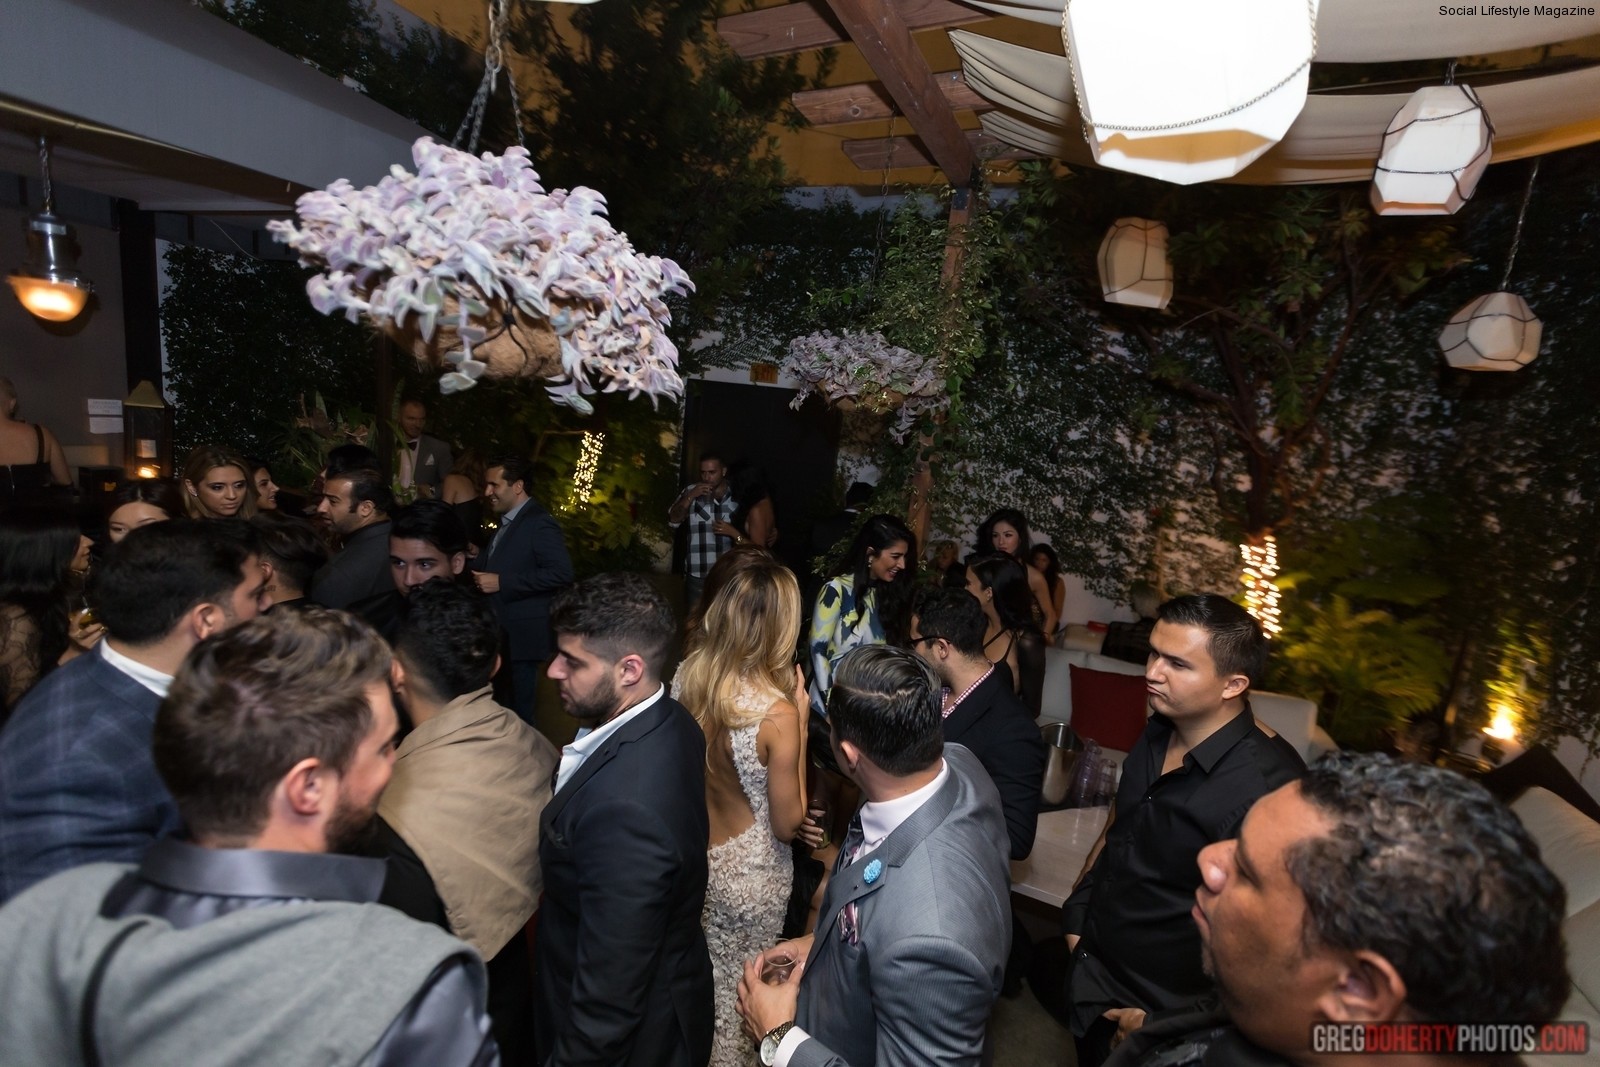 Socal-lifestyle-Magazine-launch-party-2142-X3-1